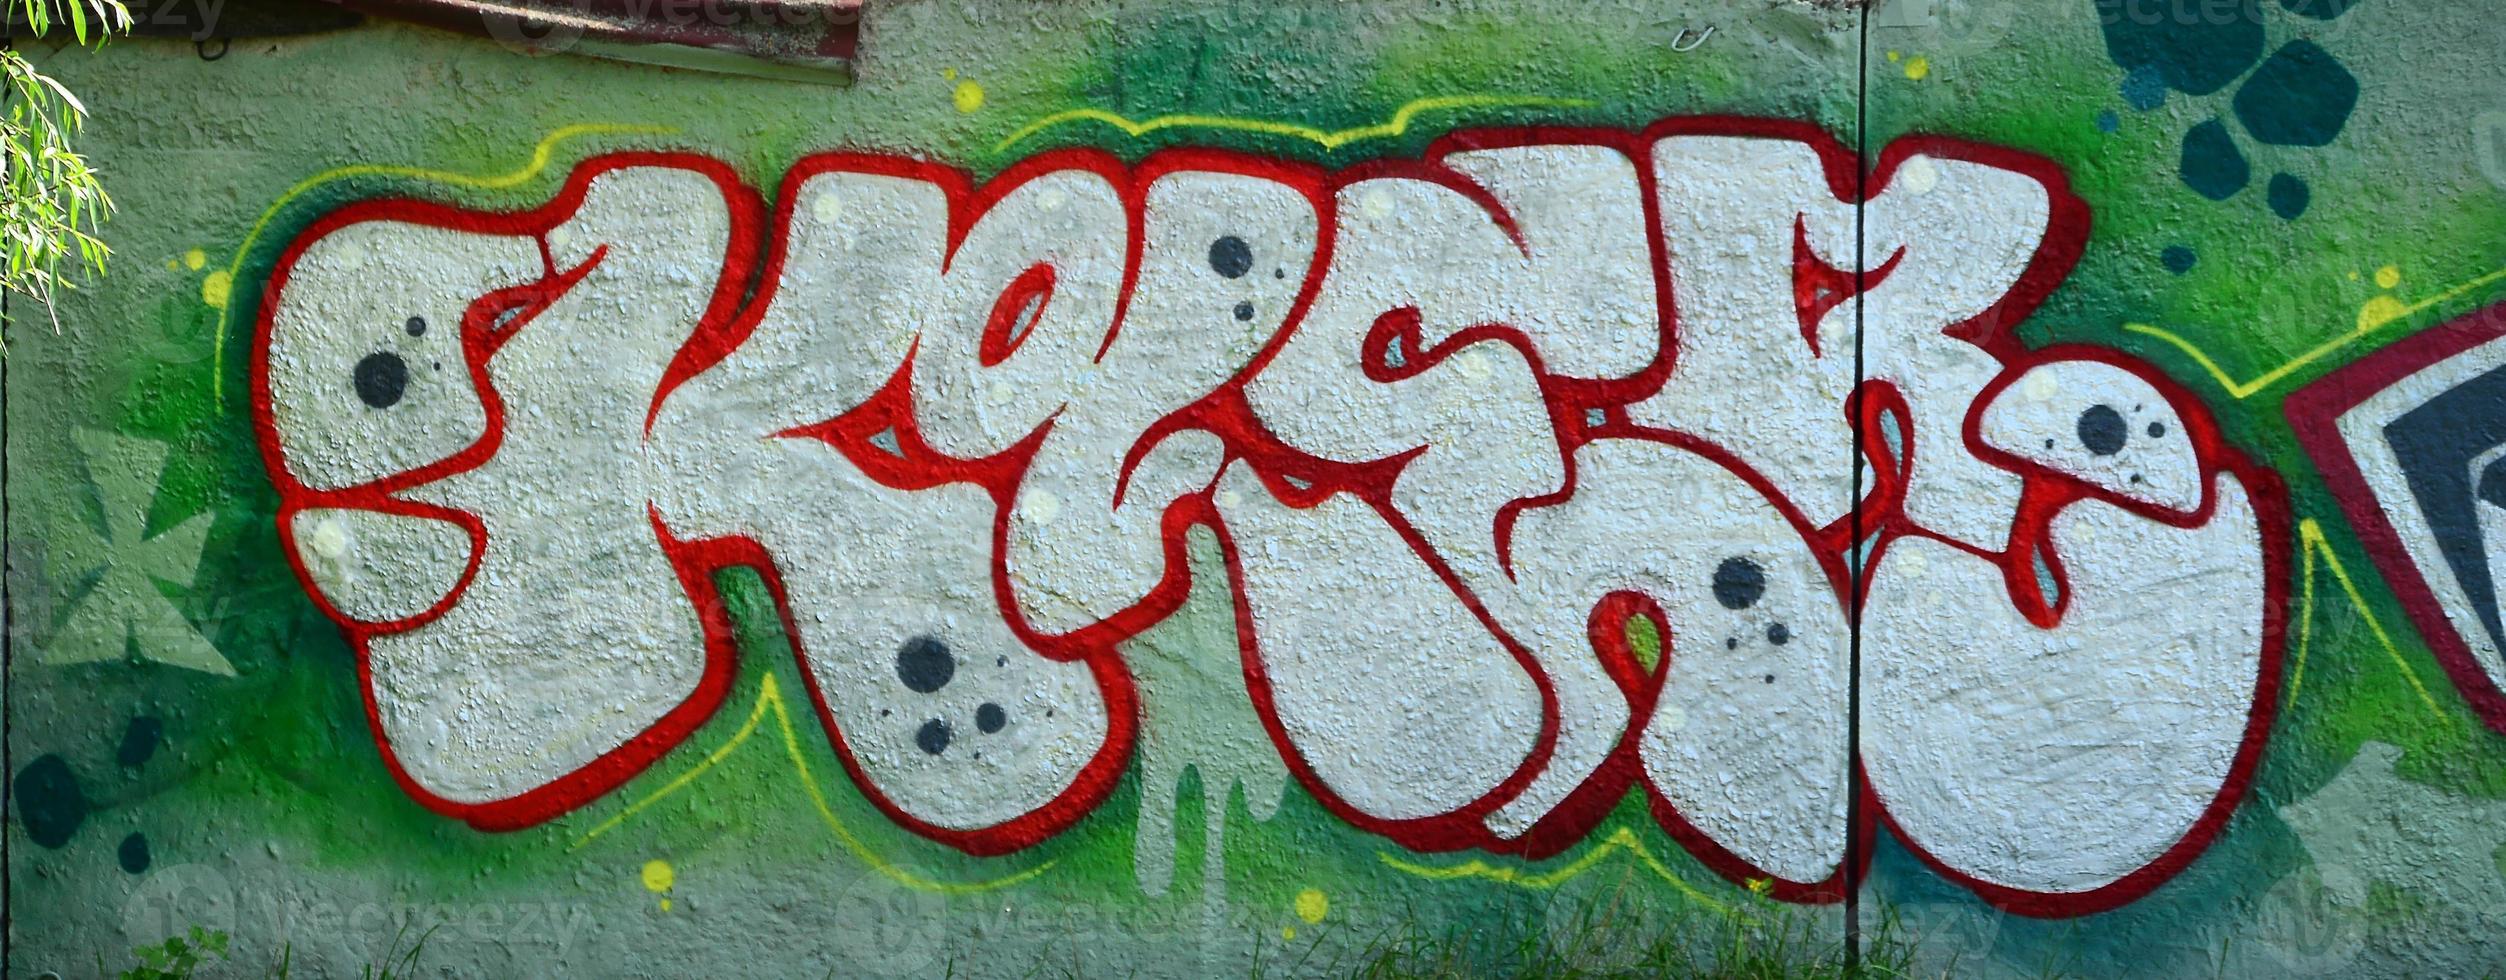 Street art. Abstract background image of a full completed graffiti painting in chrome fill, green background and red outlines photo